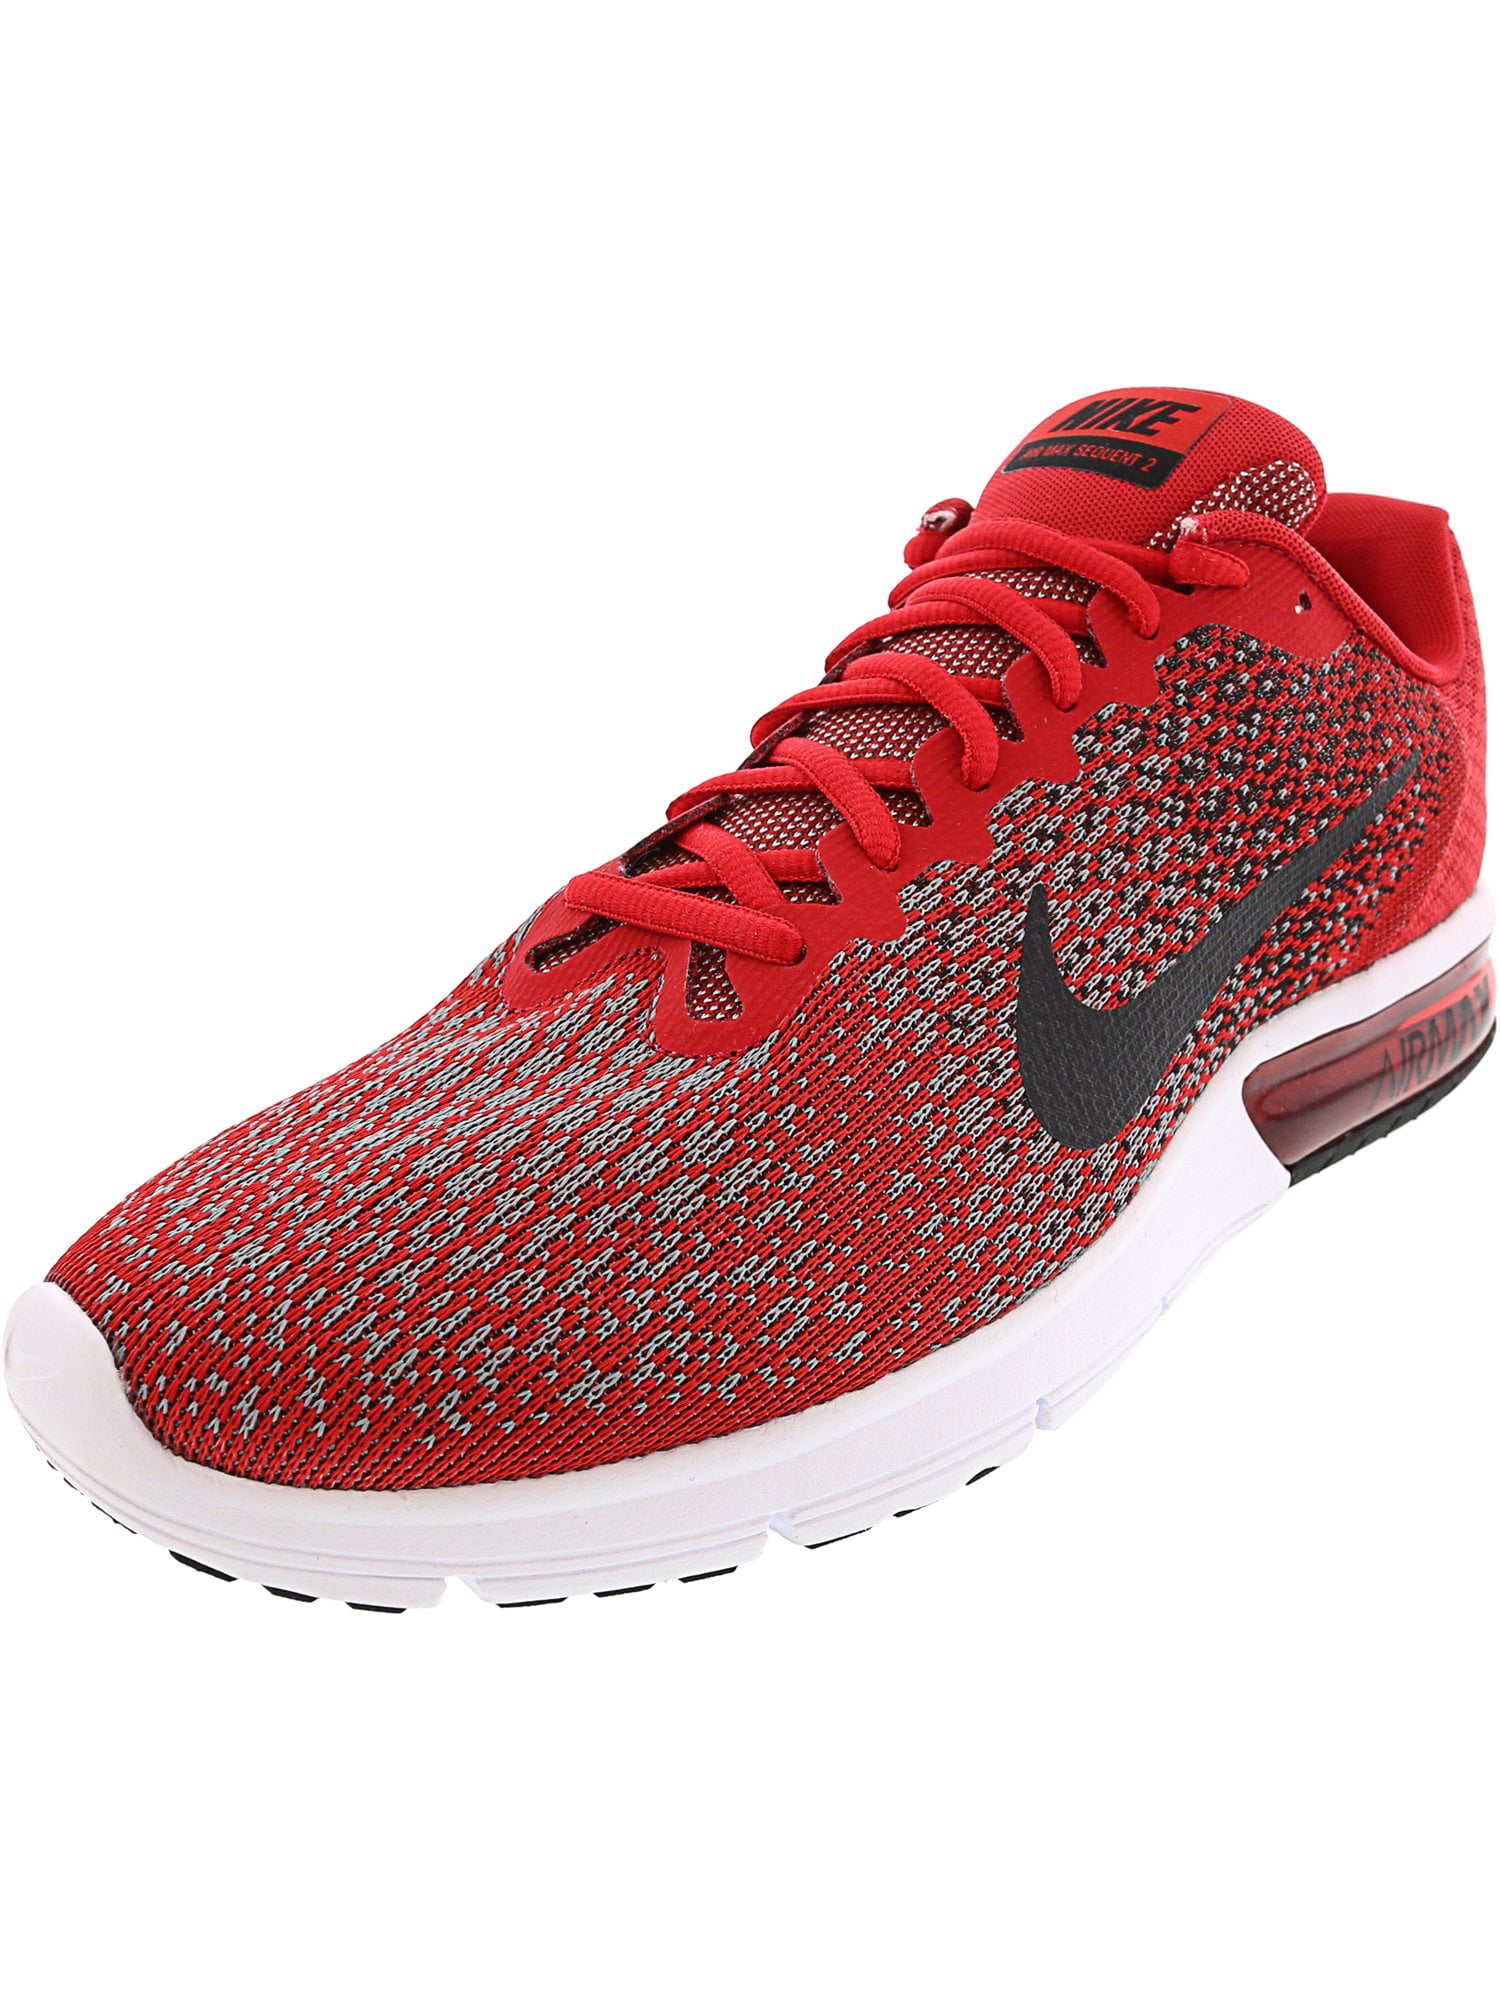 Nike Max Sequent 2 University Red / Black - Ankle-High Running Shoe 12.5M -